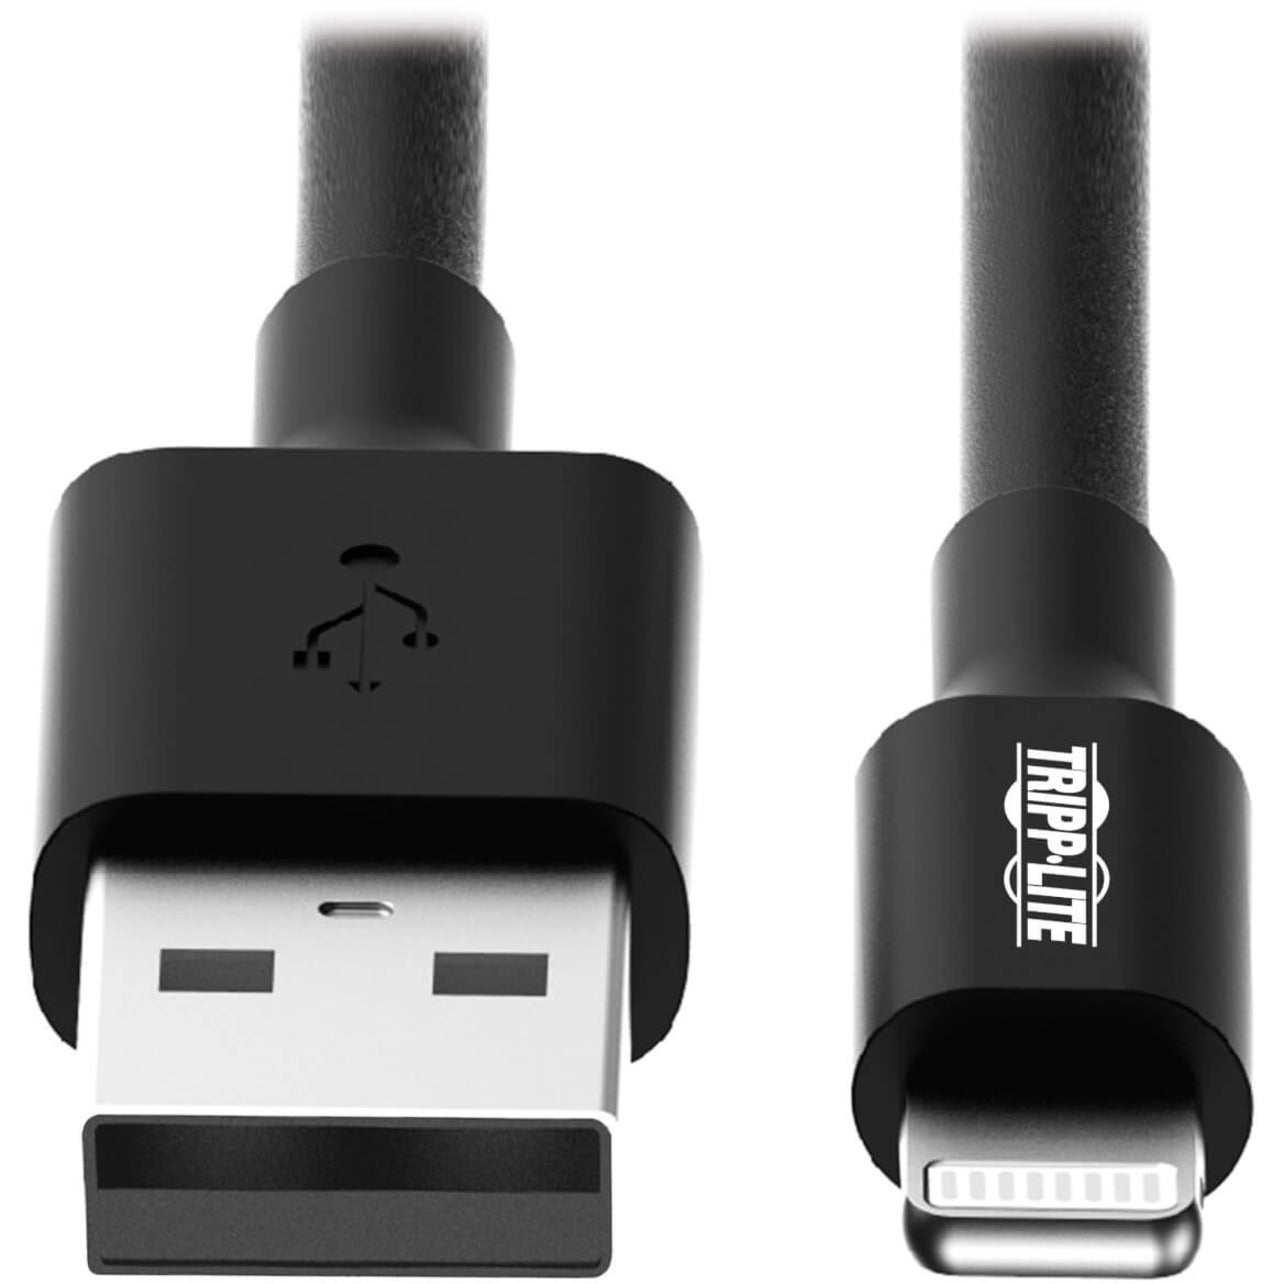 Tripp Lite M100-003-BK 3ft (1M) Black USB Sync / Charge Cable with Lightning Connector, Compatible with iPhone, iPad, iPod